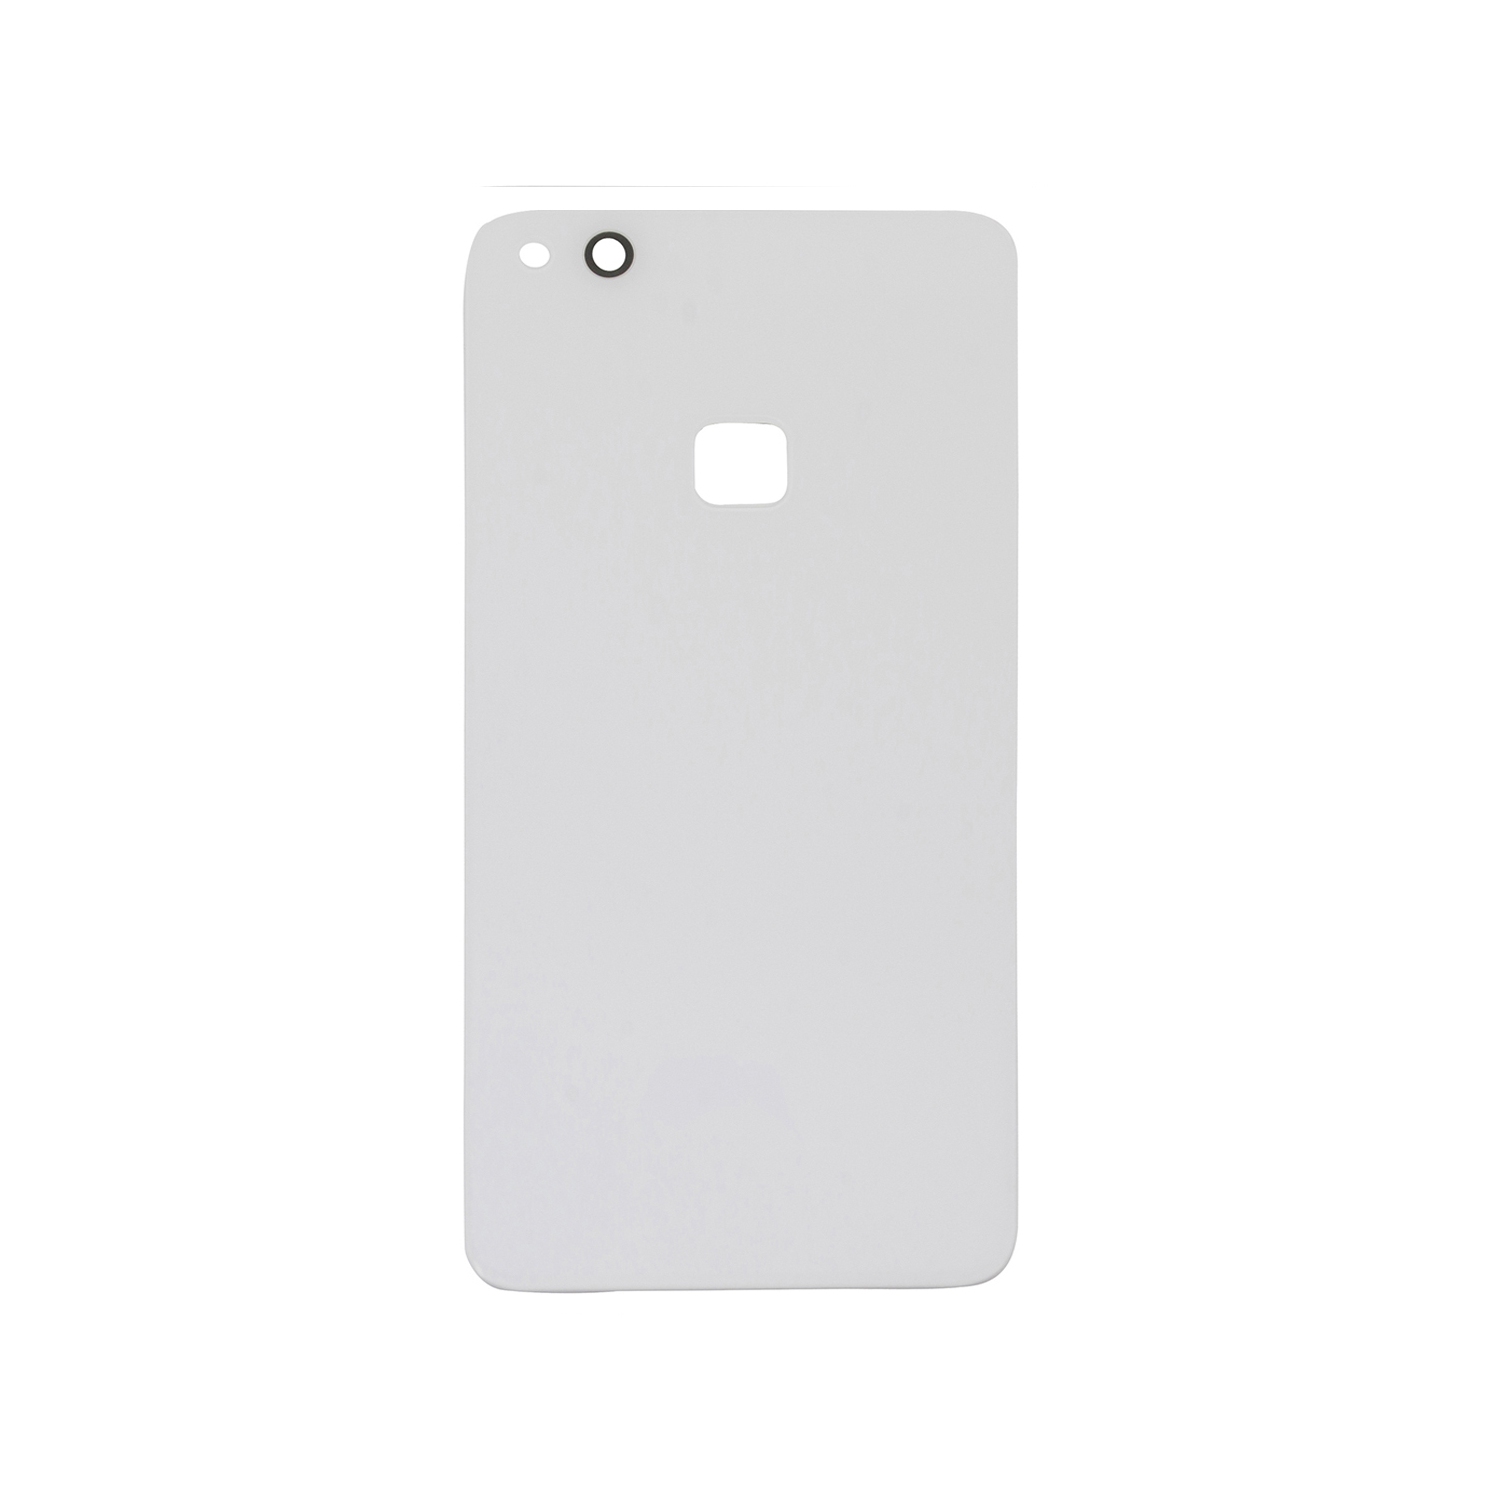 Huawei P10 Lite WAS-L03T Battery Rear Back Cover Housing Case Replacement - White